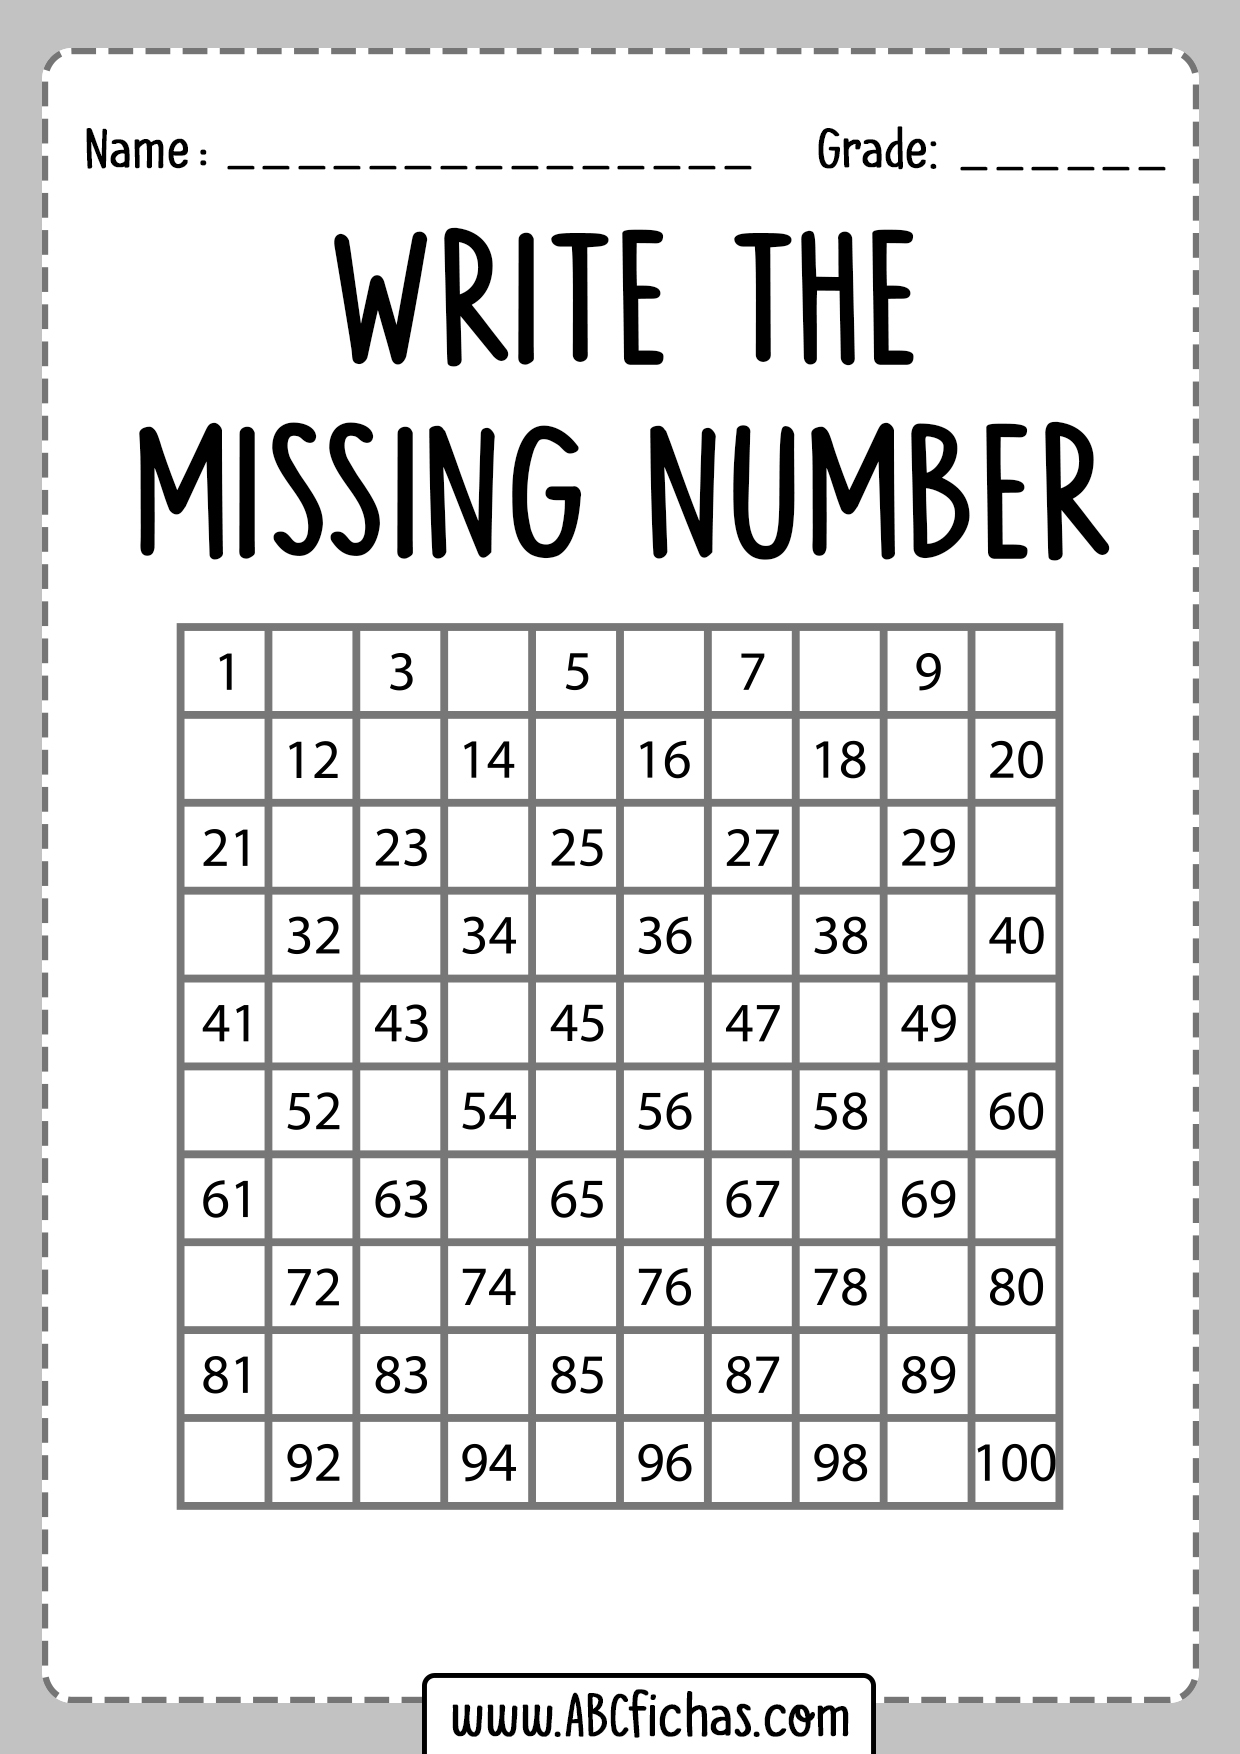 Write the missing number worksheets for first grade